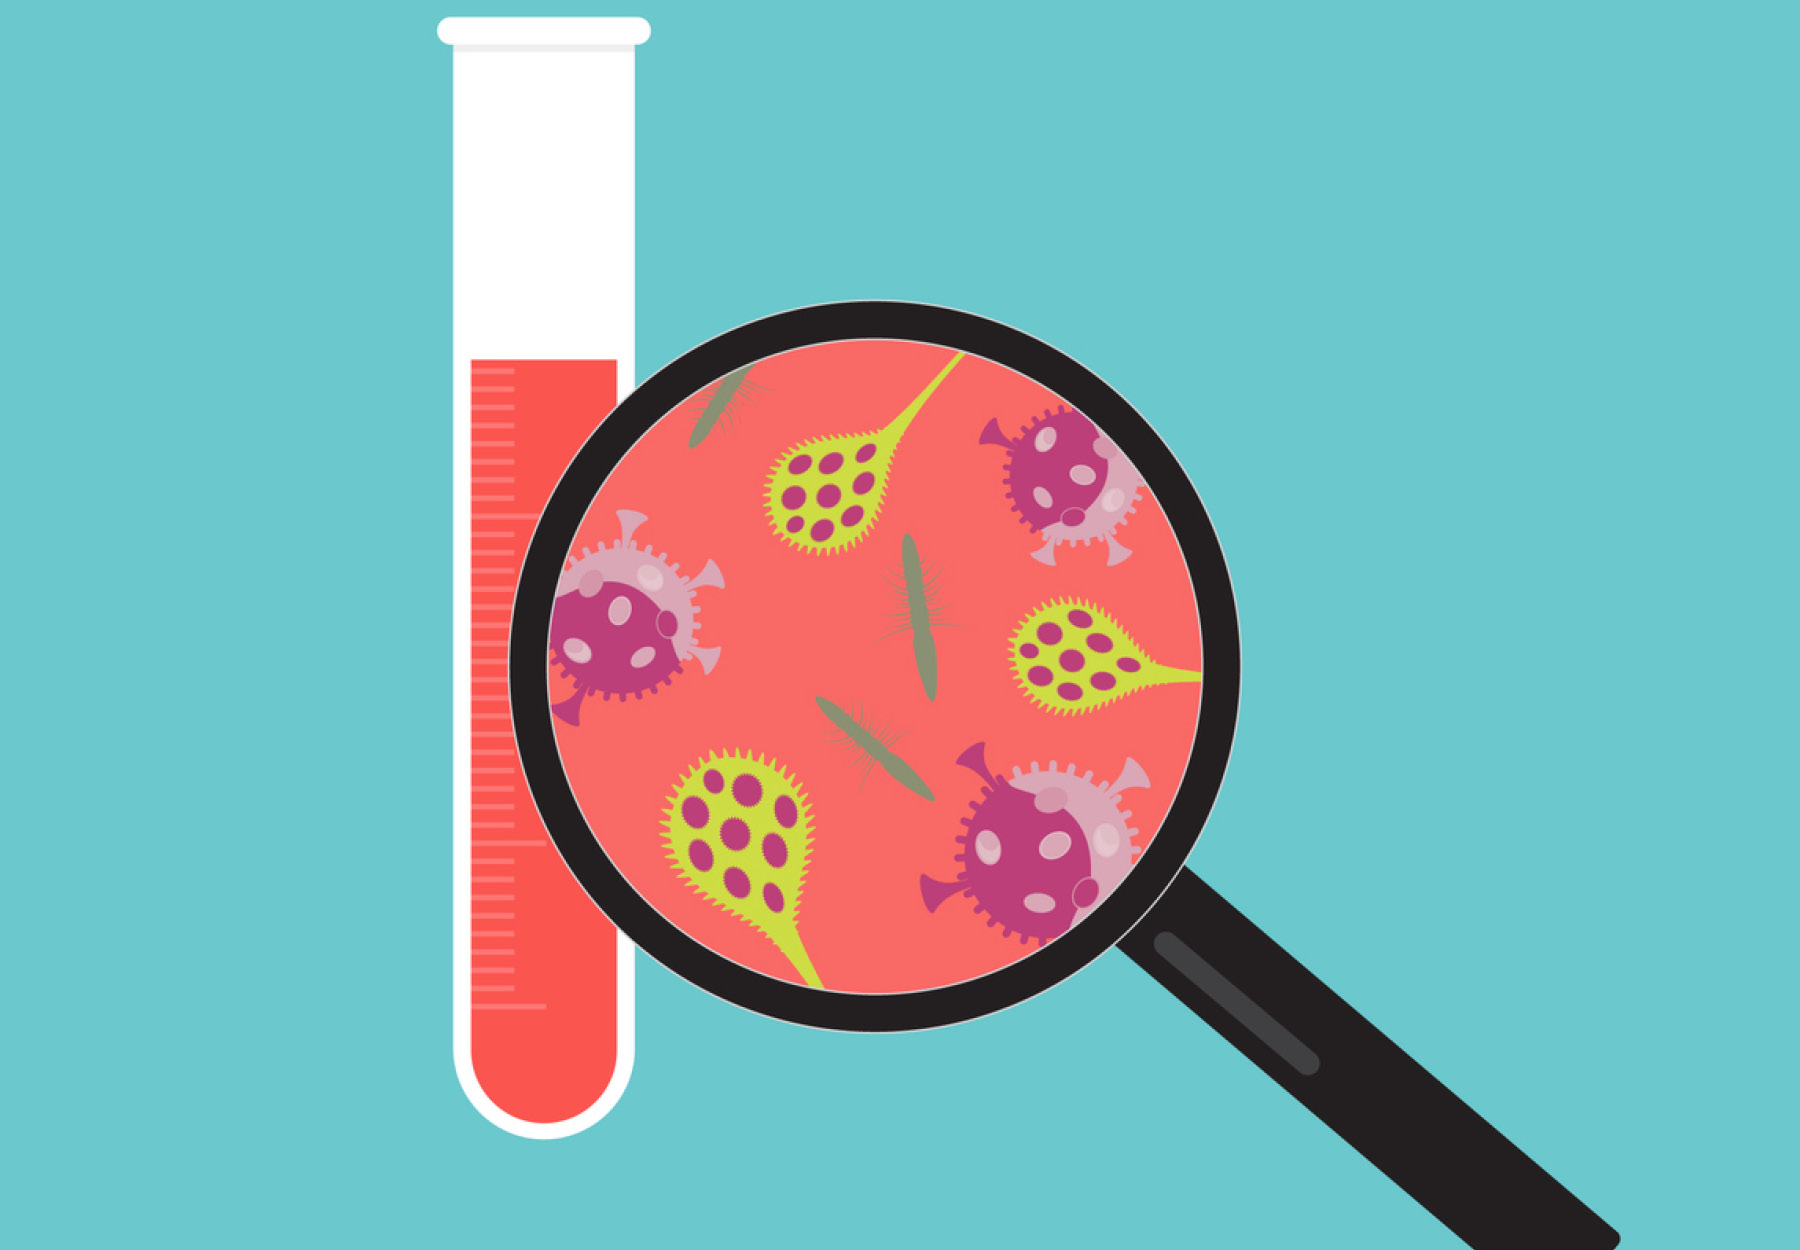 Illustration of a test tube of blood with a magnifying glass held up to it, showing a variety of viruses. Infectious disease testing concept. iStock image.